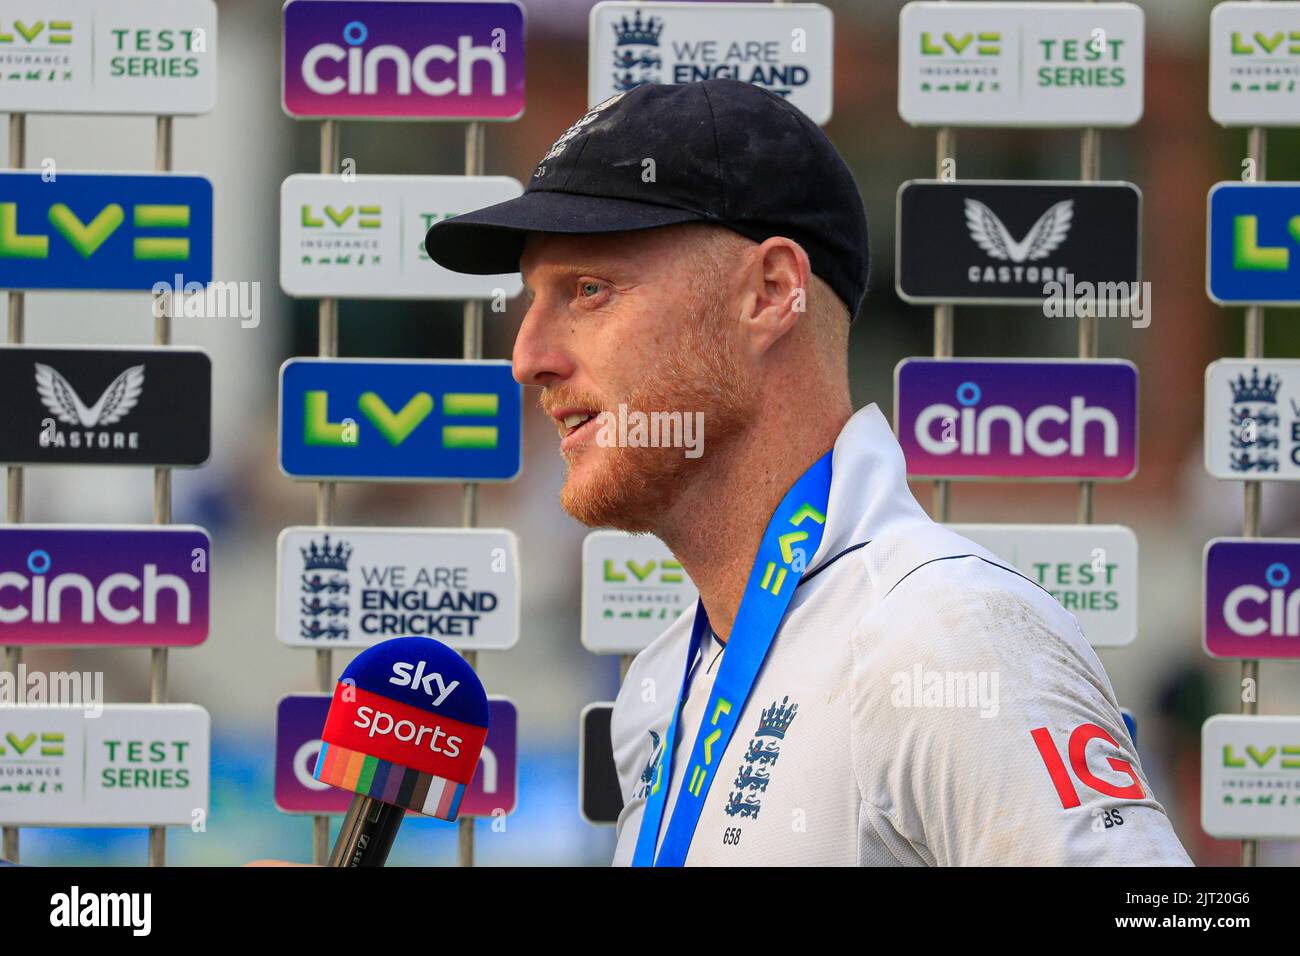 Manchester, UK. 27th Aug, 2022. Ben Stokes of England doing his post match media interview in Manchester, United Kingdom on 8/27/2022. (Photo by Conor Molloy/News Images/Sipa USA) Credit: Sipa USA/Alamy Live News Stock Photo